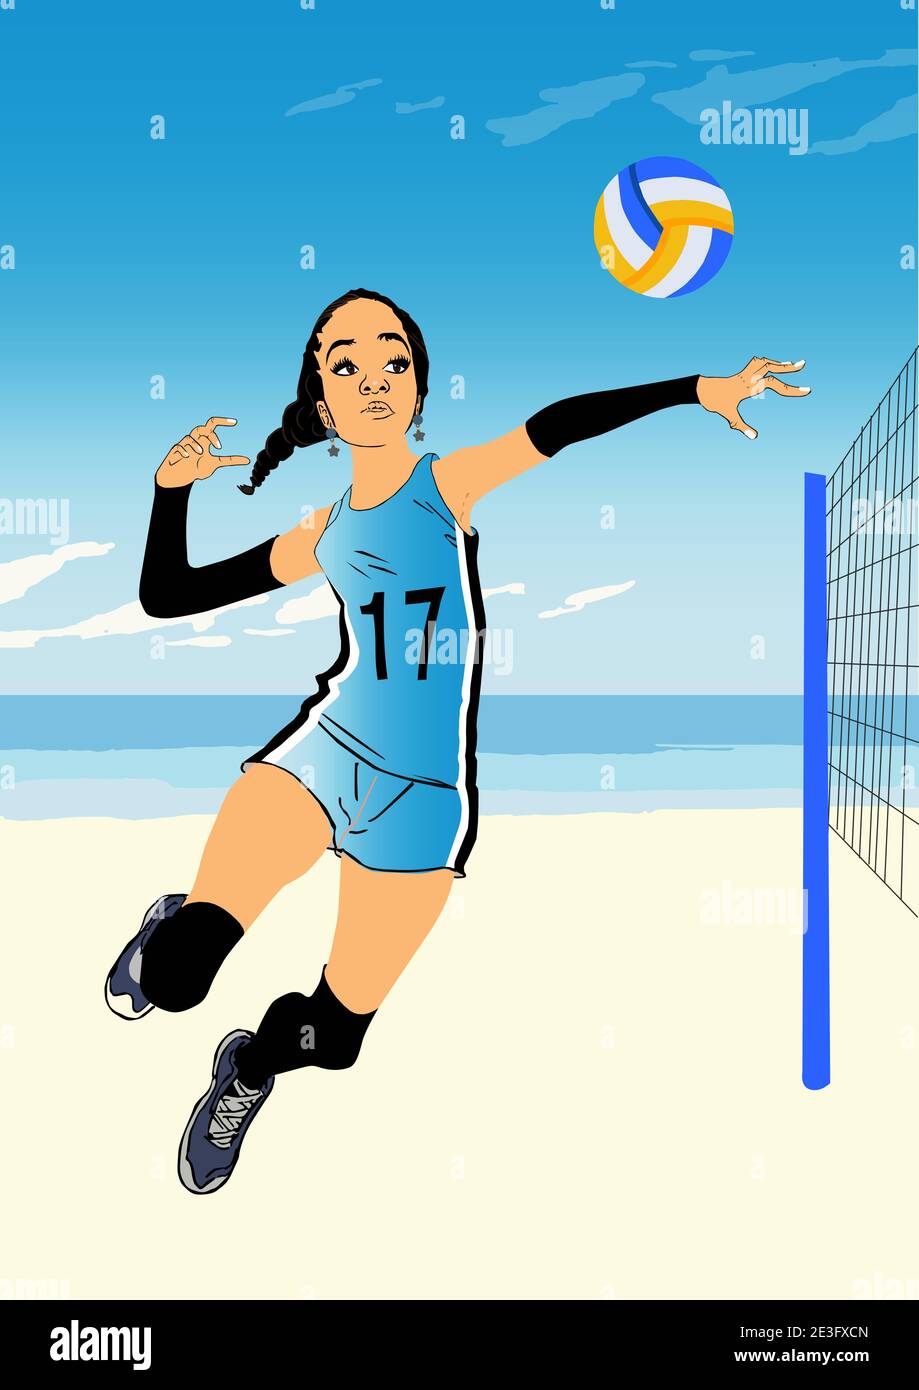 Girl playing volleyball illustration. Volleyball girl character. Stock Vector